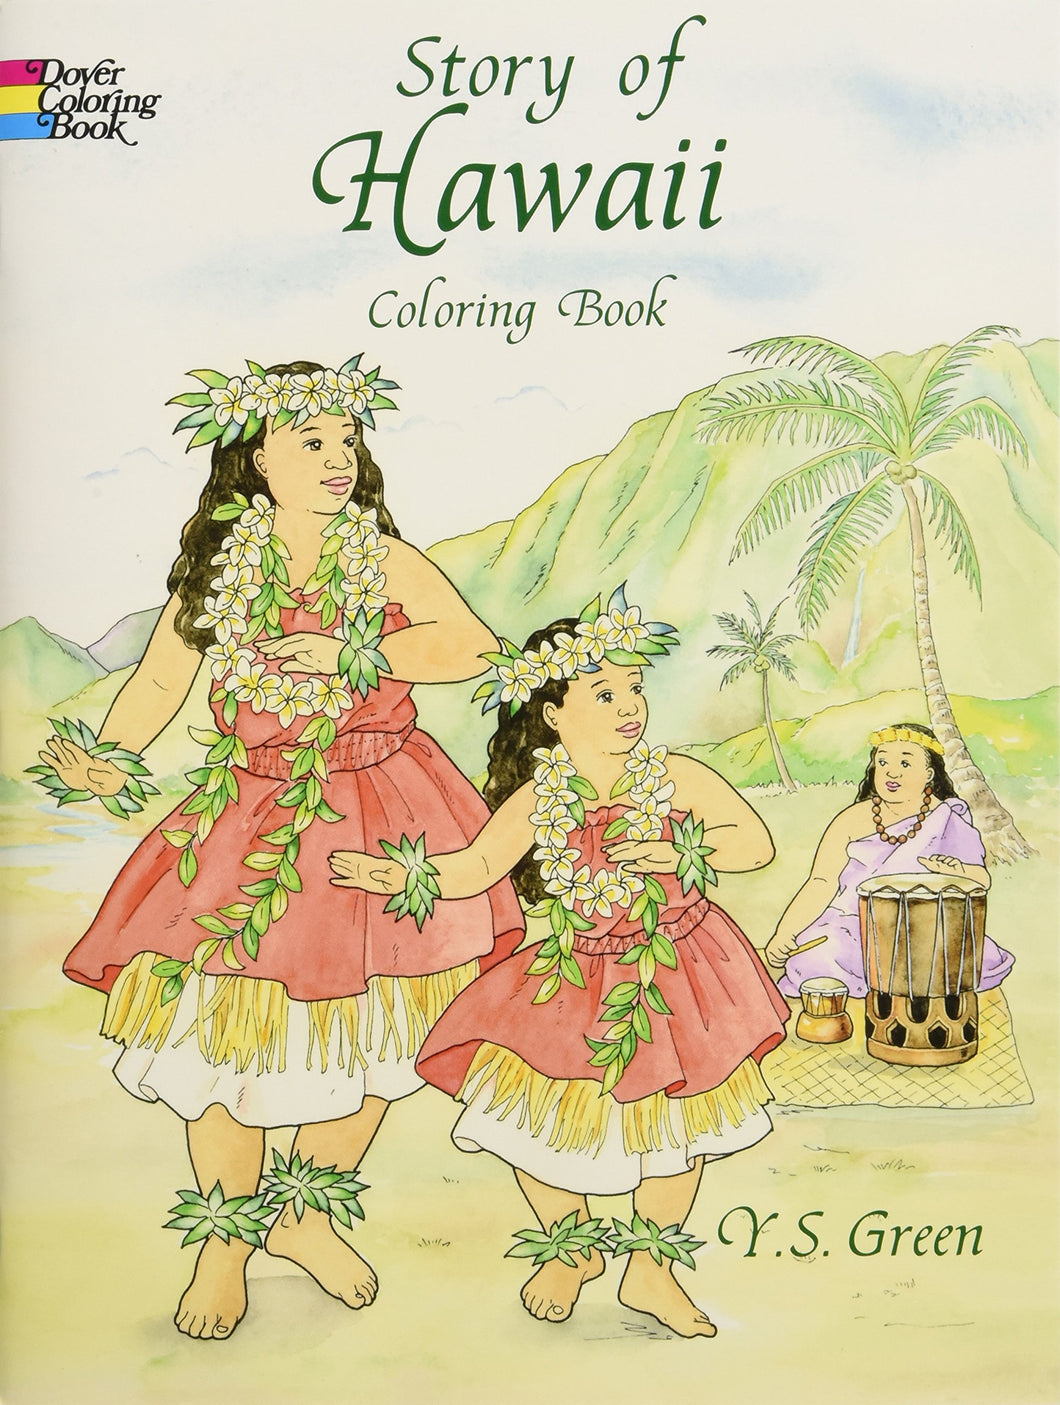 Story of Hawaii Coloring Book by Y. S. Green